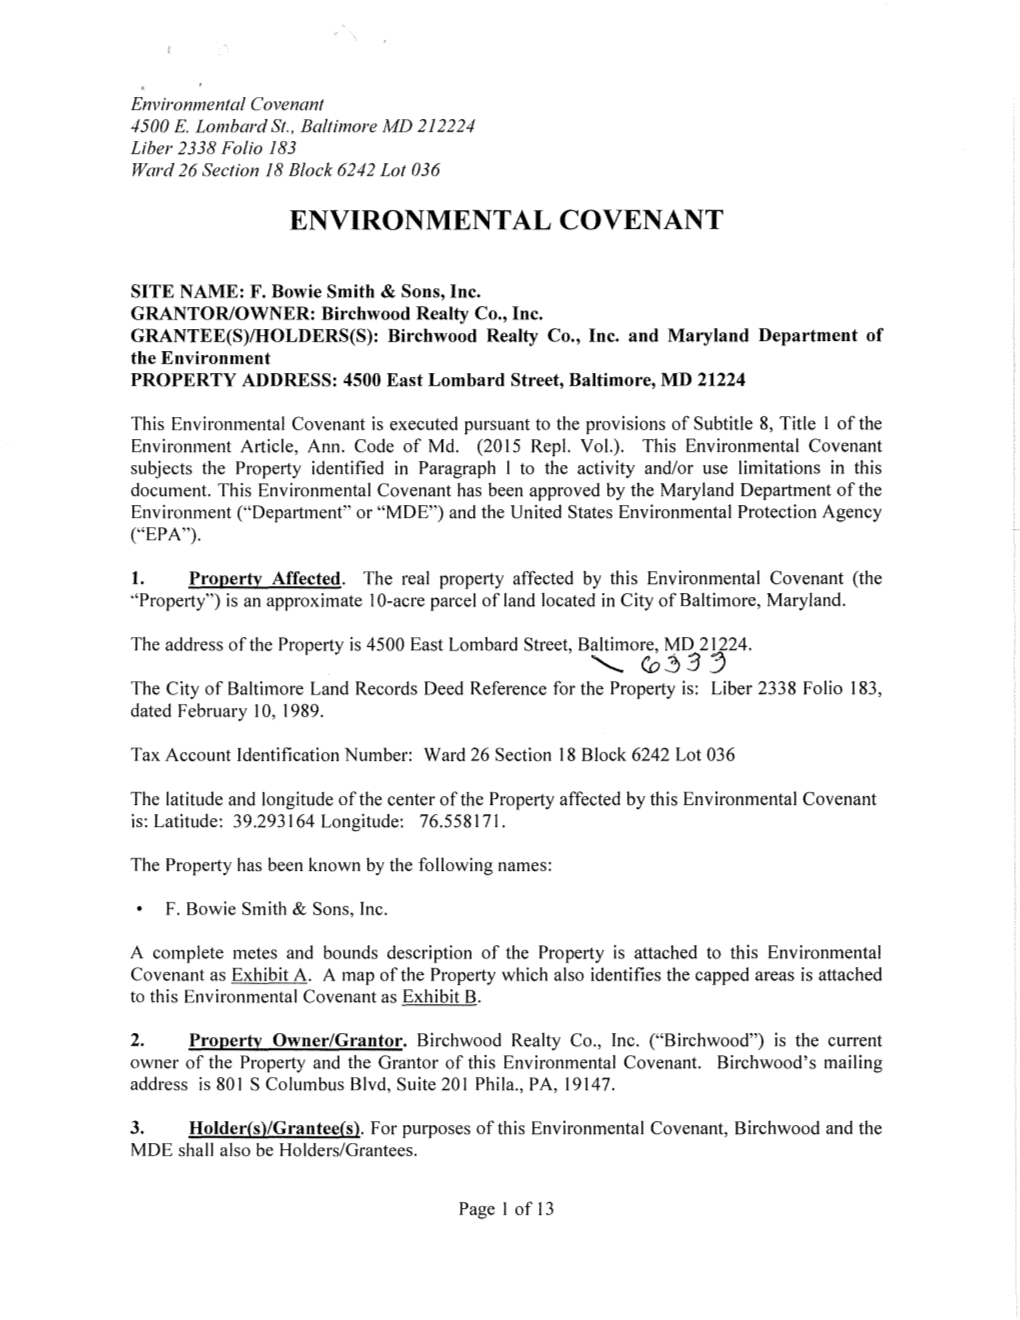 RCRA Environmental Covenant for F. Bowie Smith